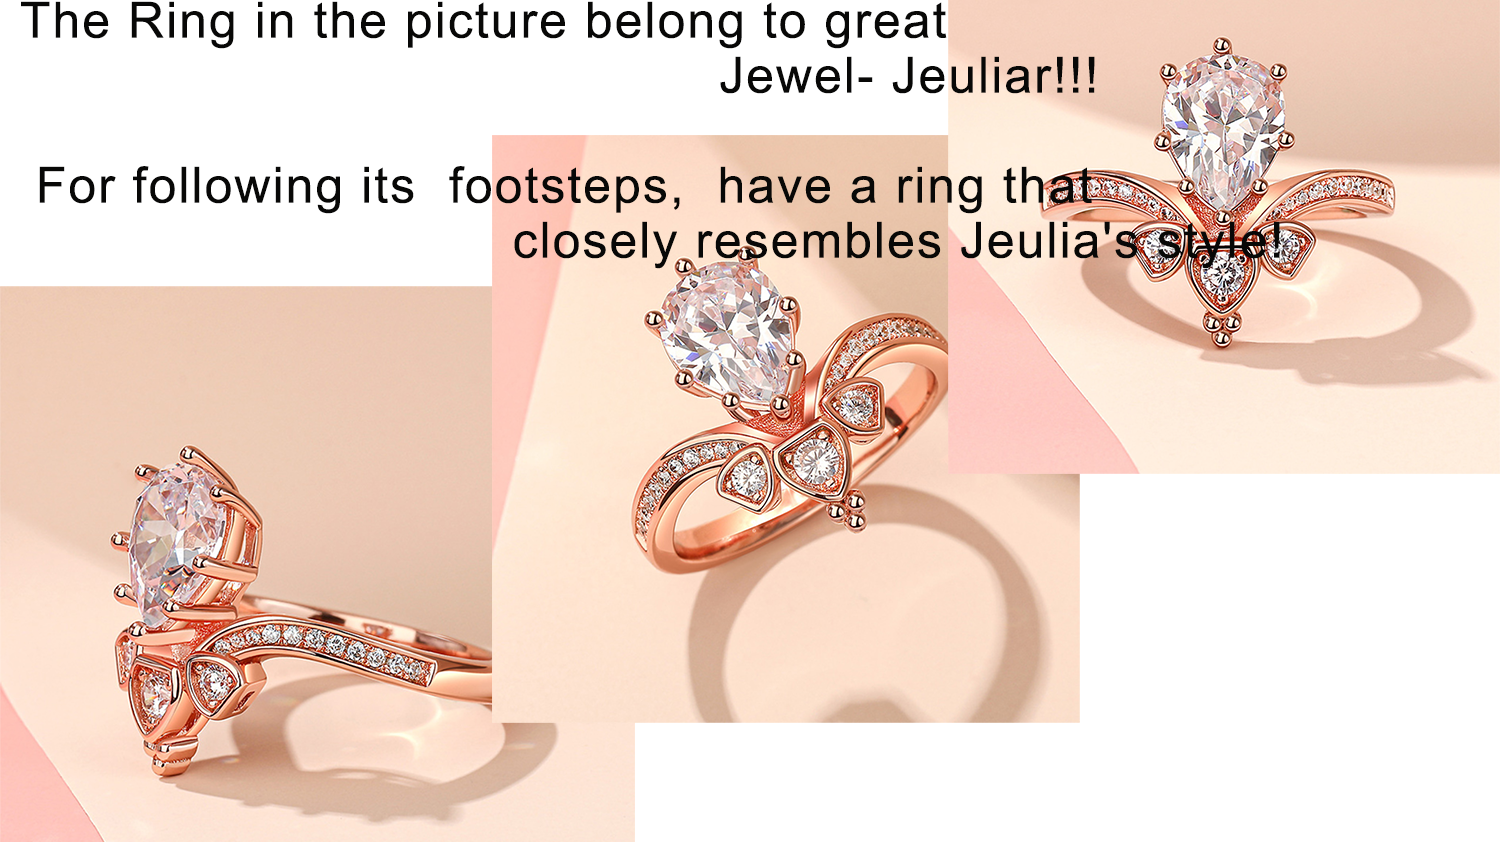 We have a ring that closely resembles Jeulia's style!